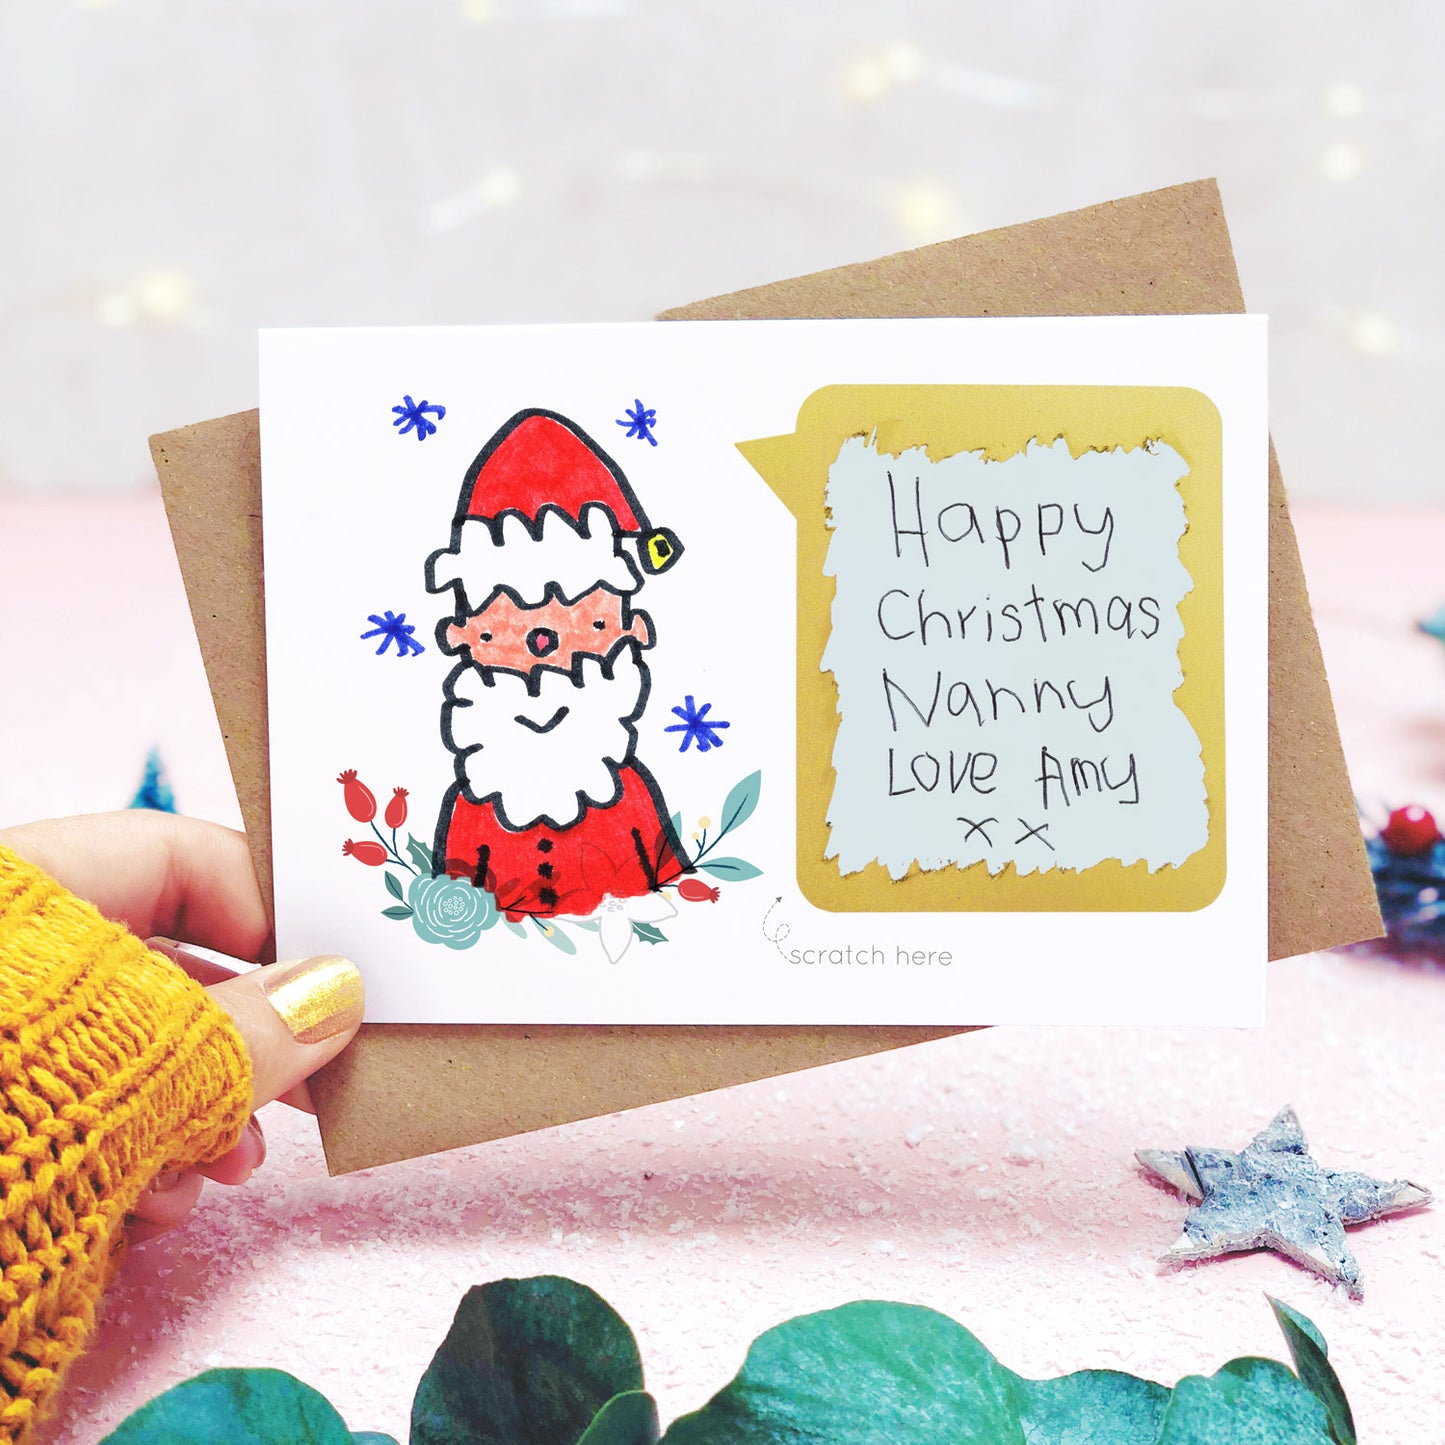 A make your own Christmas scratch card showing a childs drawing of father christmas and the scratch panel having been scratched to reveal the hand written message. Shot on pink and white with a hand and greenery.